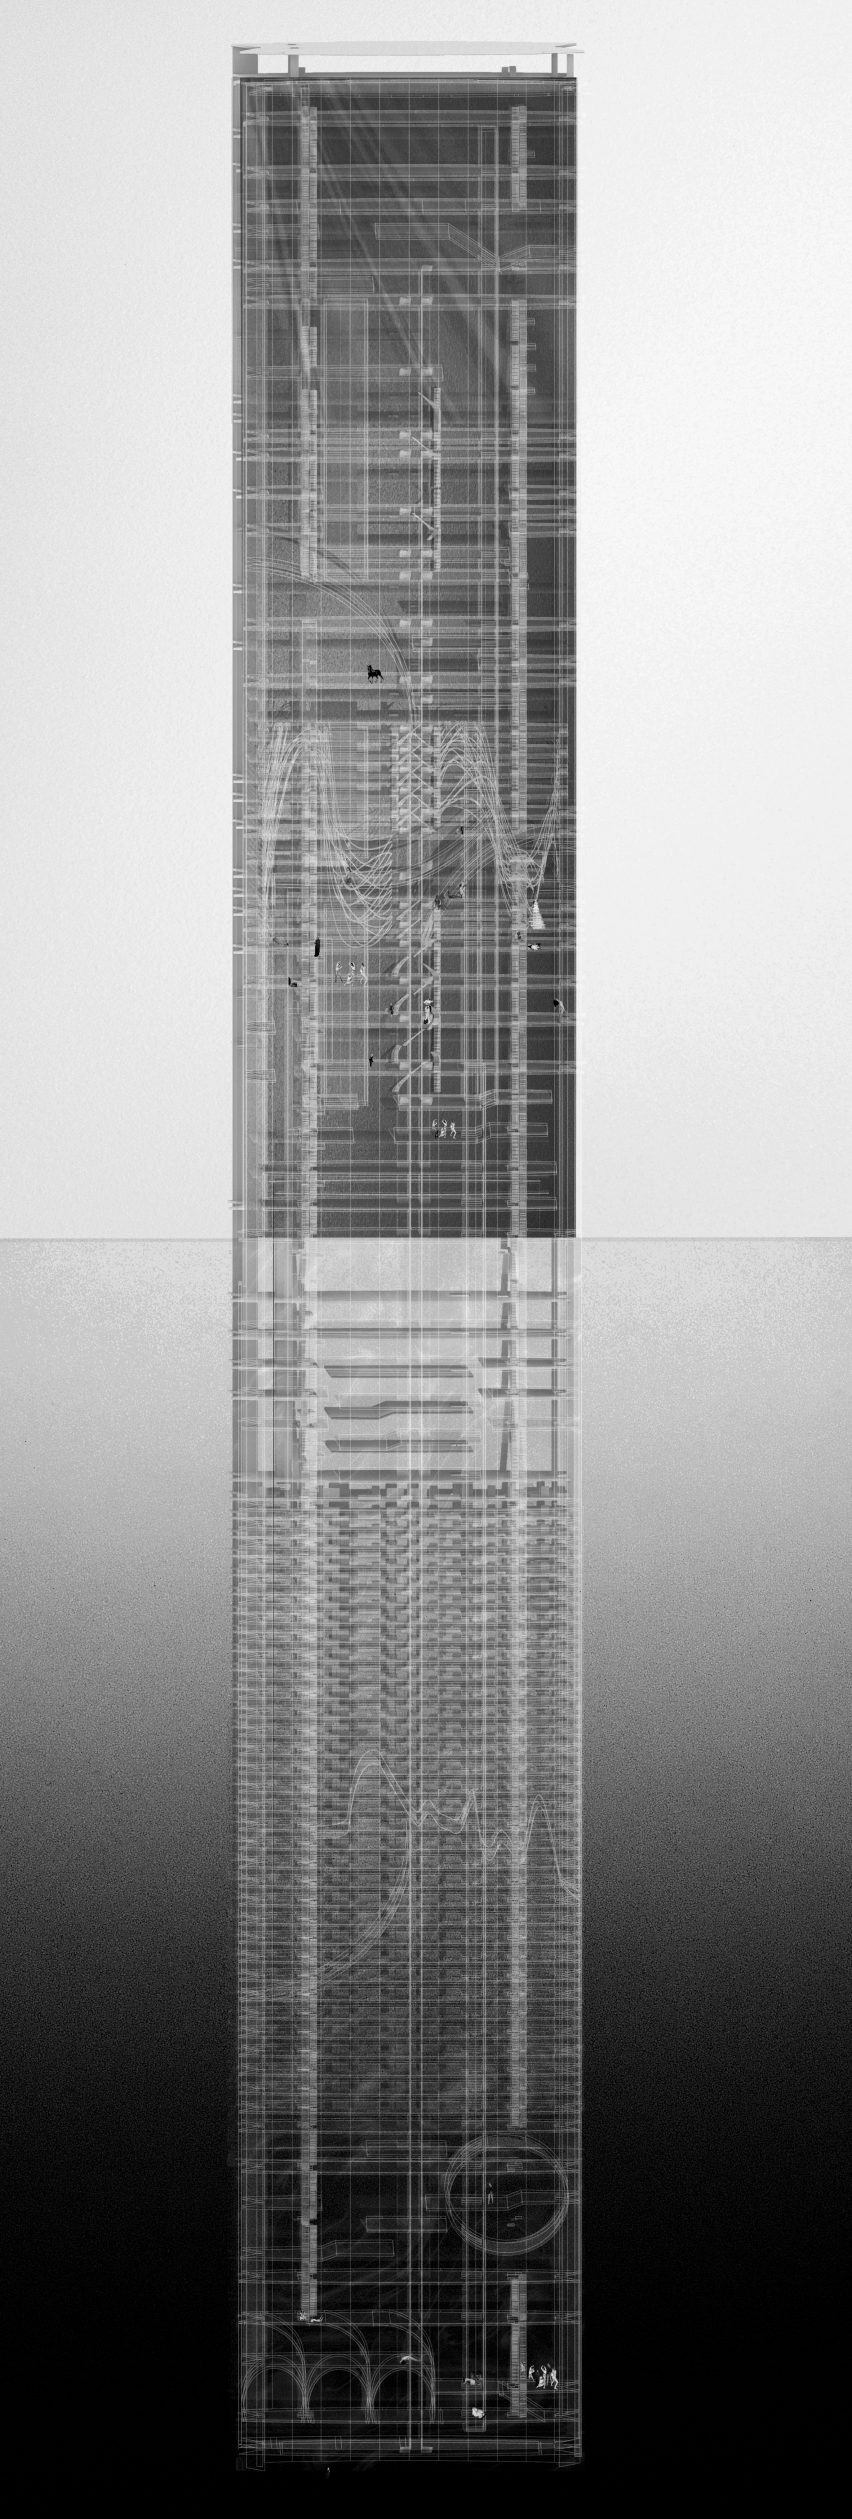 Tall sectional view of Montparnasse tower